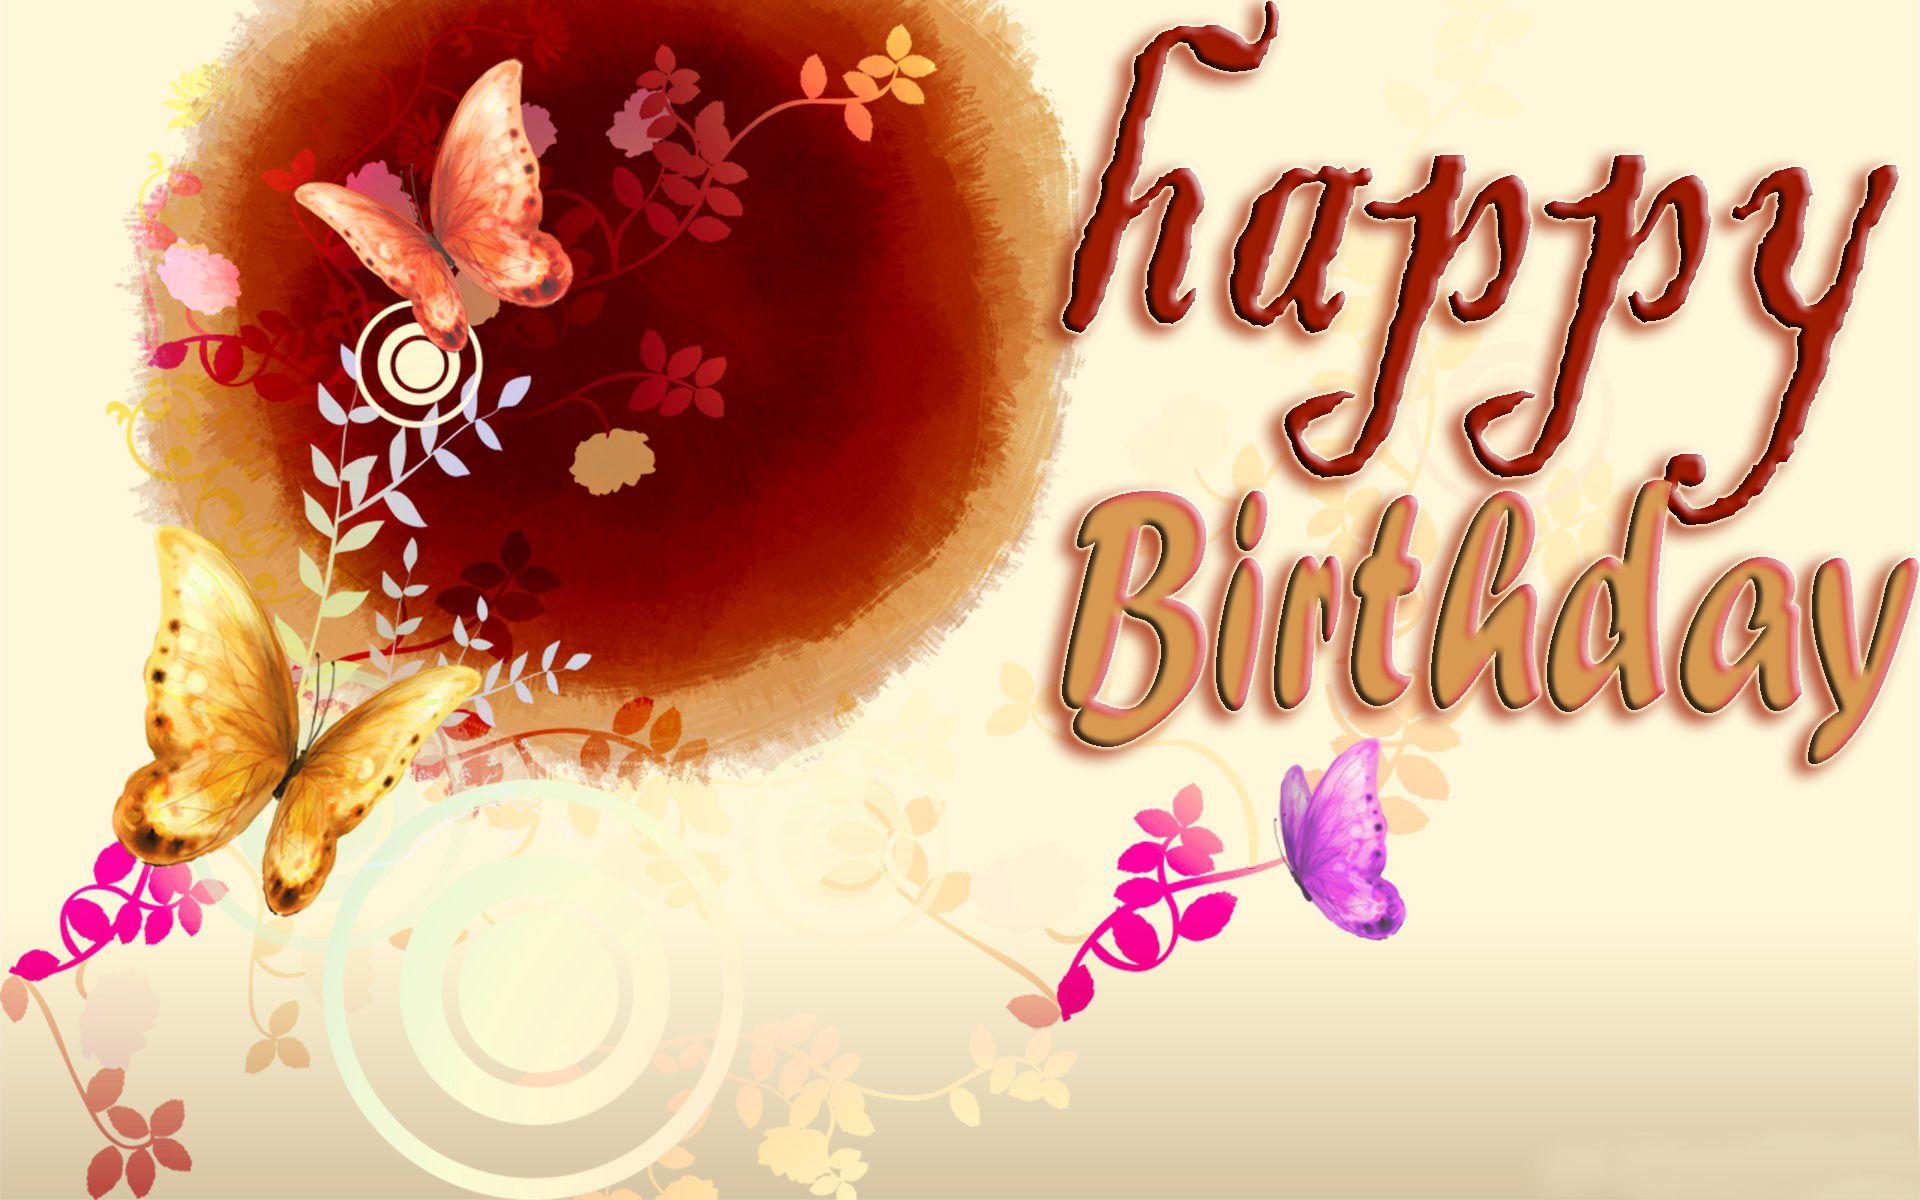 Happy Birthday Wishes Wallpaper and Image Download Free 4